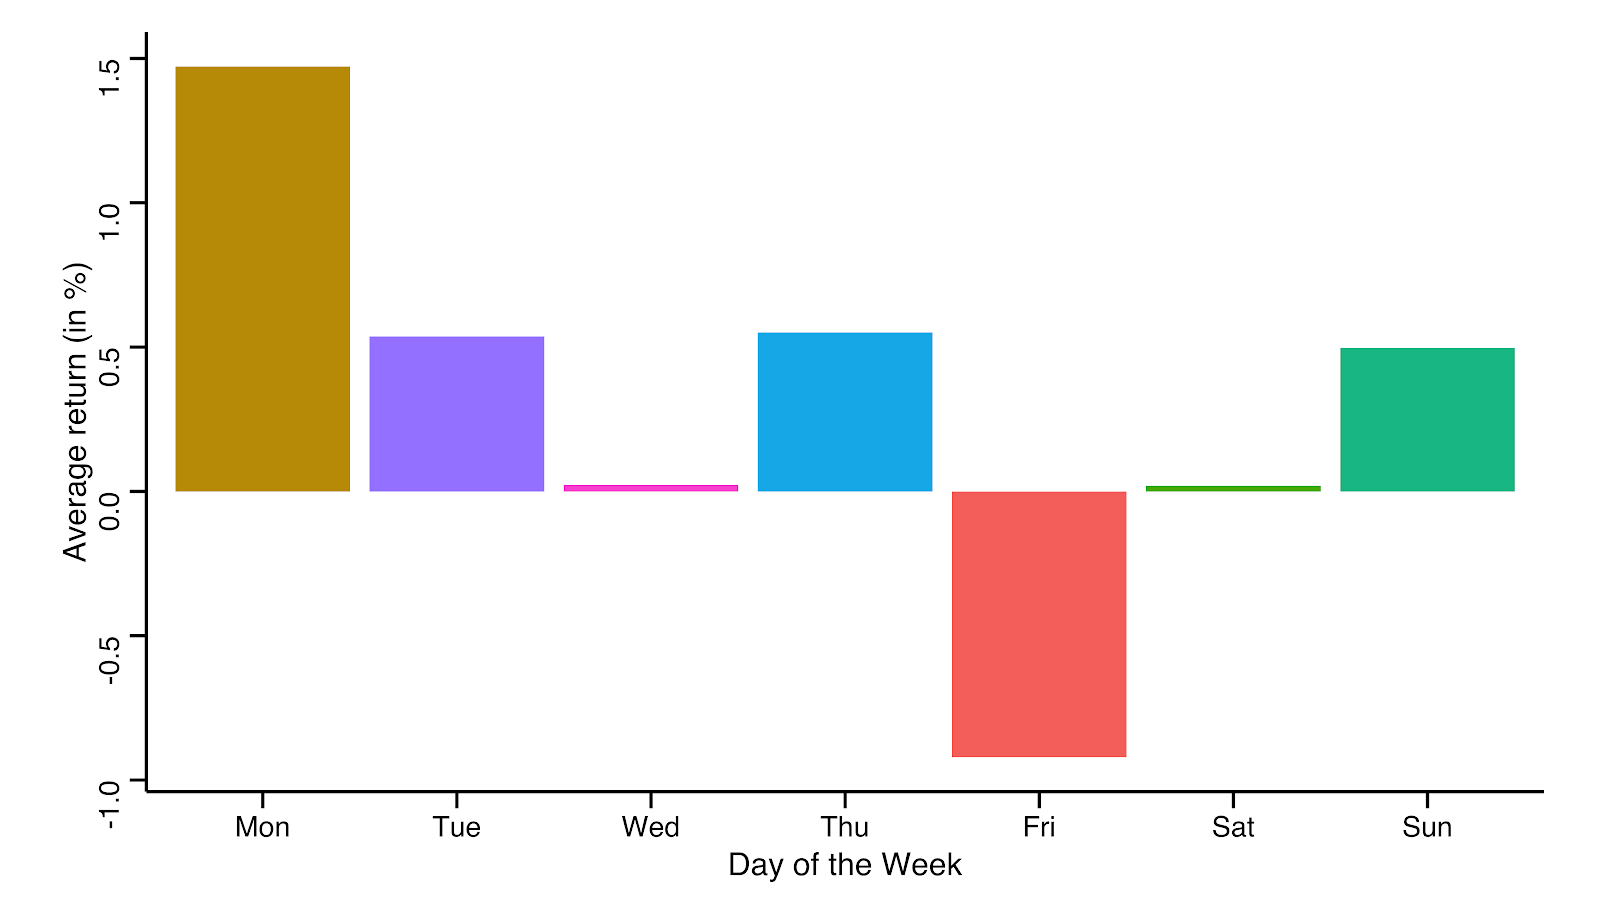 Average Daily Return for each Day of the Week between during 2017